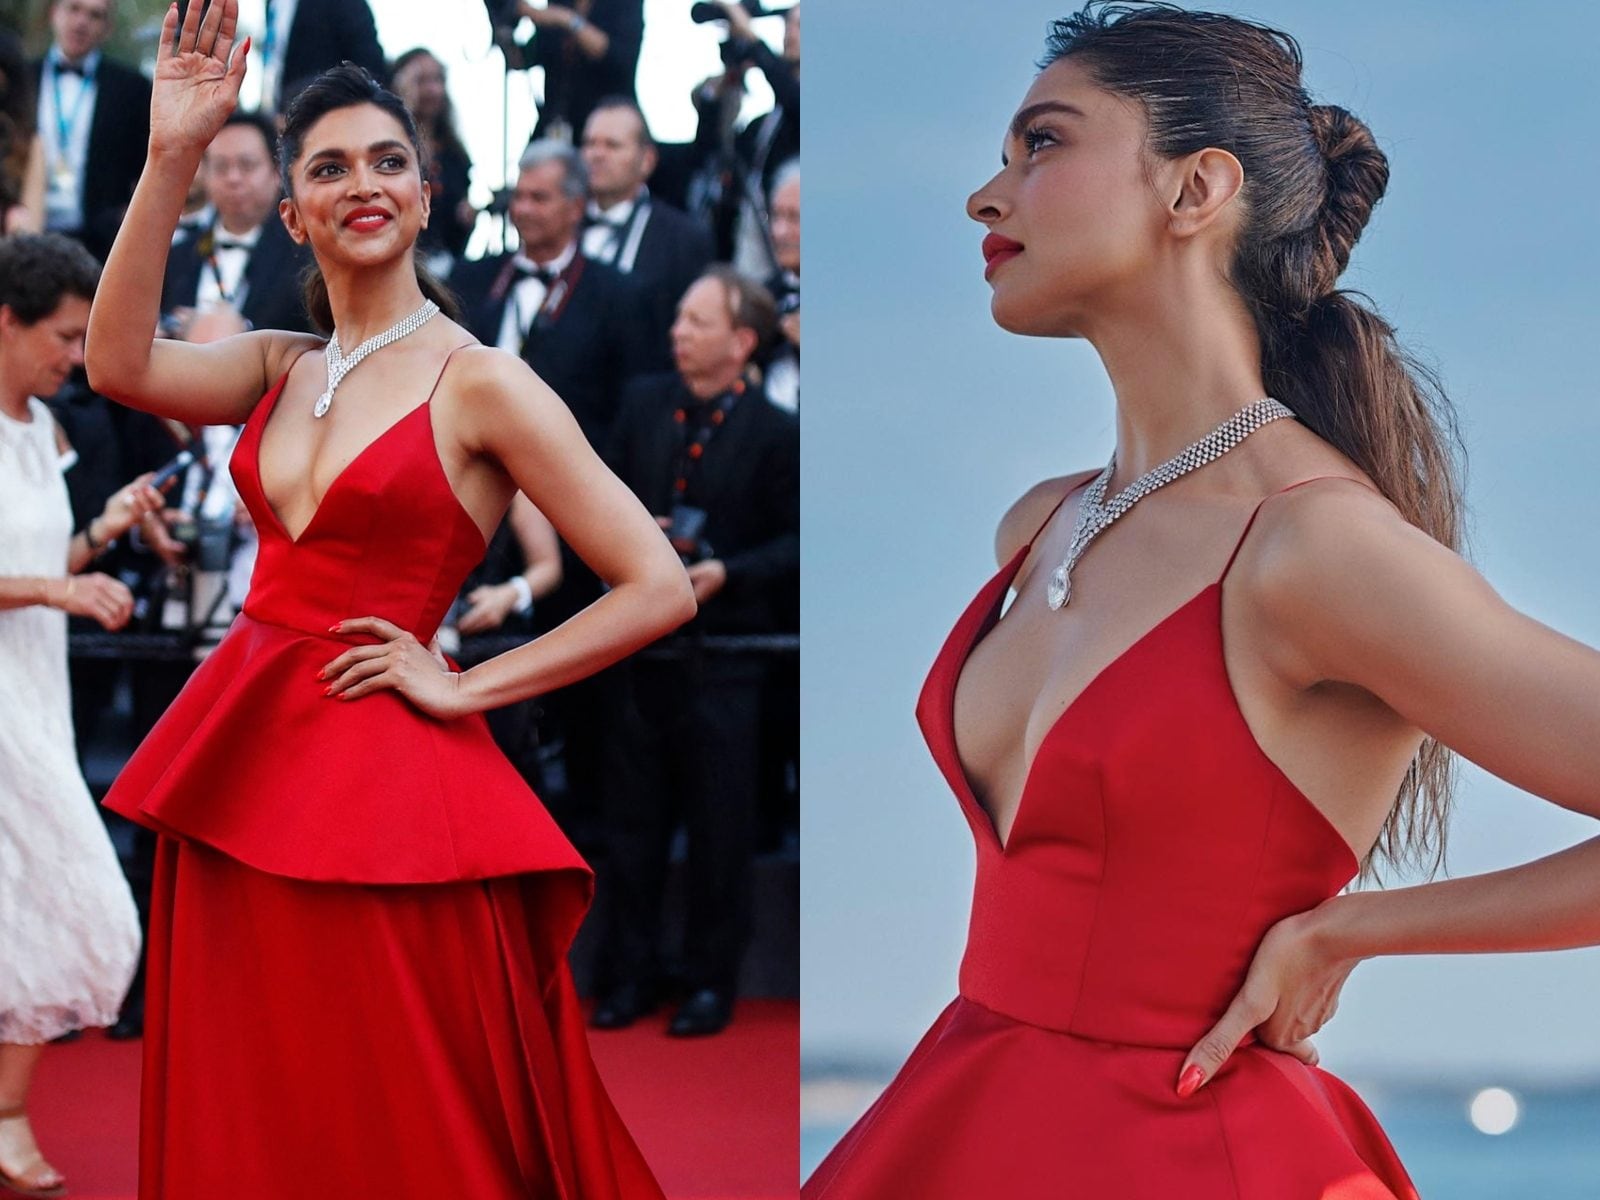 Deepika Padukone Ki Nangi Sexy Video Full Hd - Deepika Padukone Makes A Red Hot Entrance In Sexy Low-Cut Outfit on Day 3  At Cannes; See Pics - News18